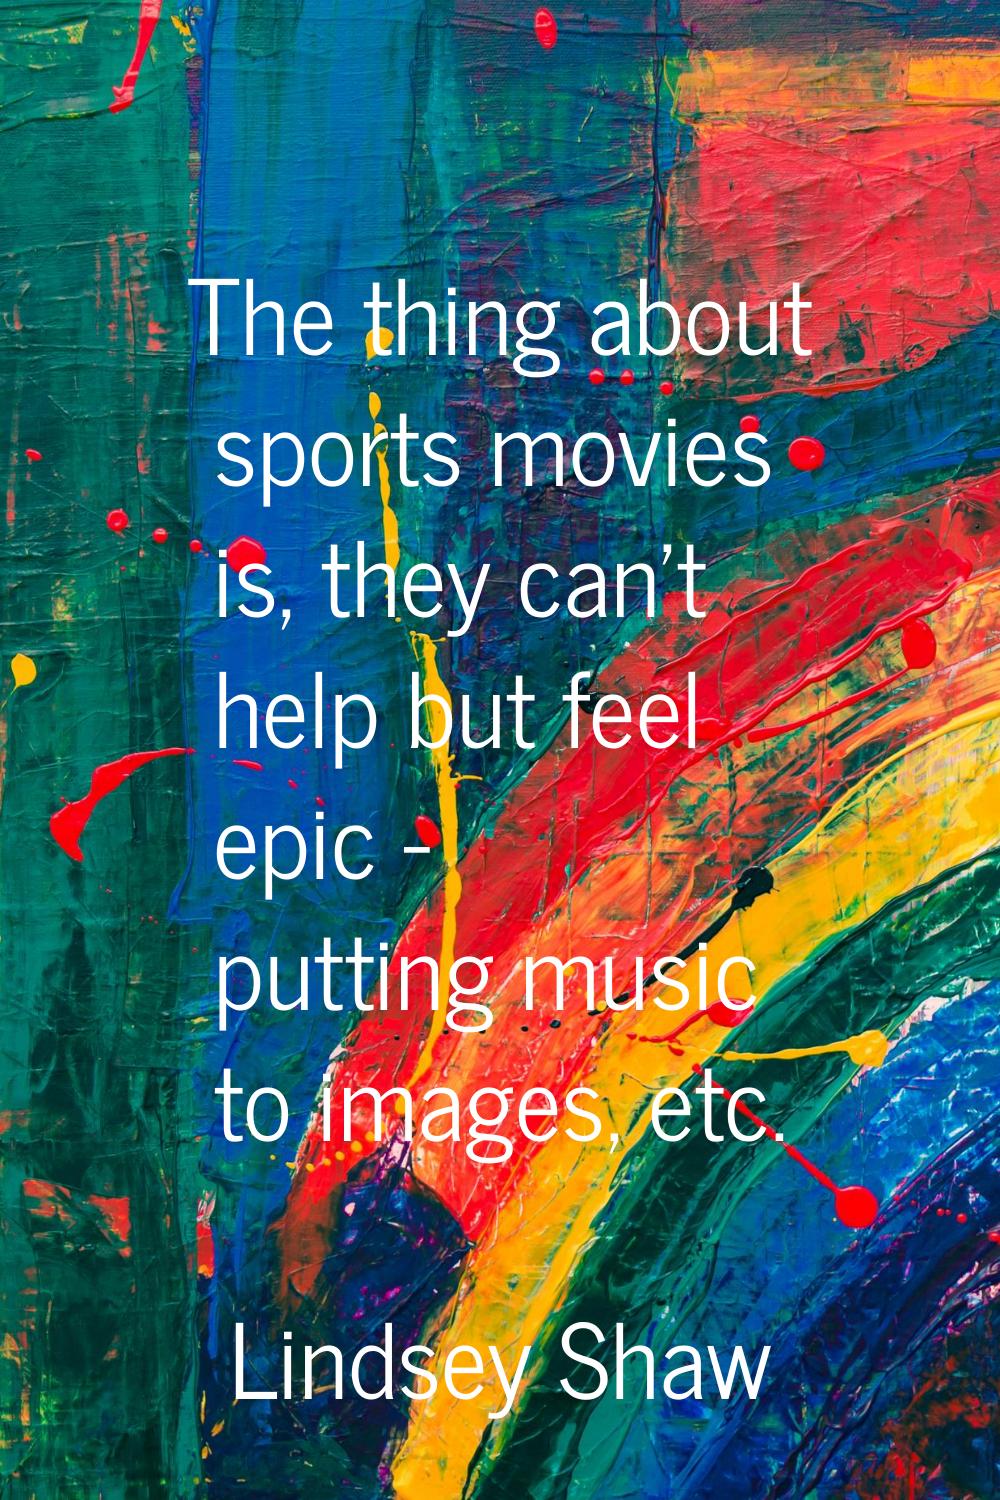 The thing about sports movies is, they can't help but feel epic - putting music to images, etc.